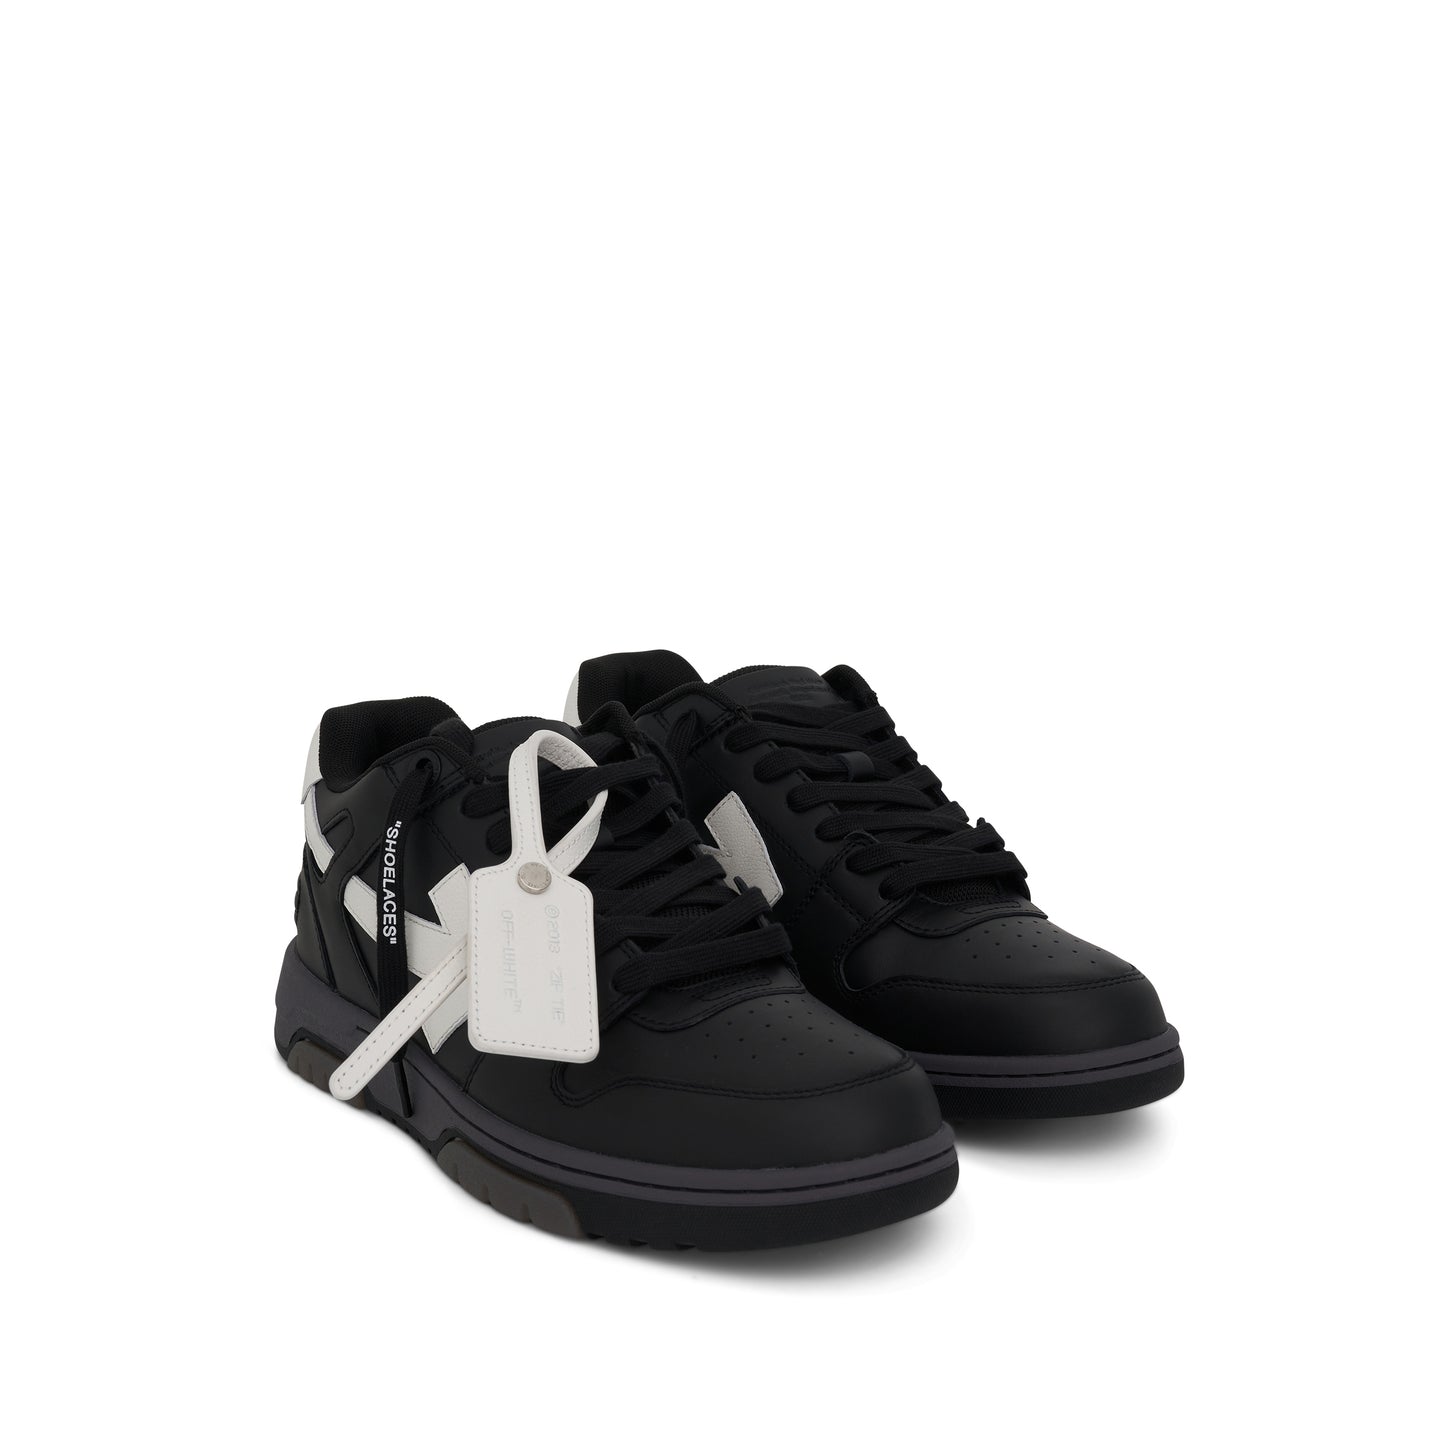 Out Of Office Sneakers in Black & White